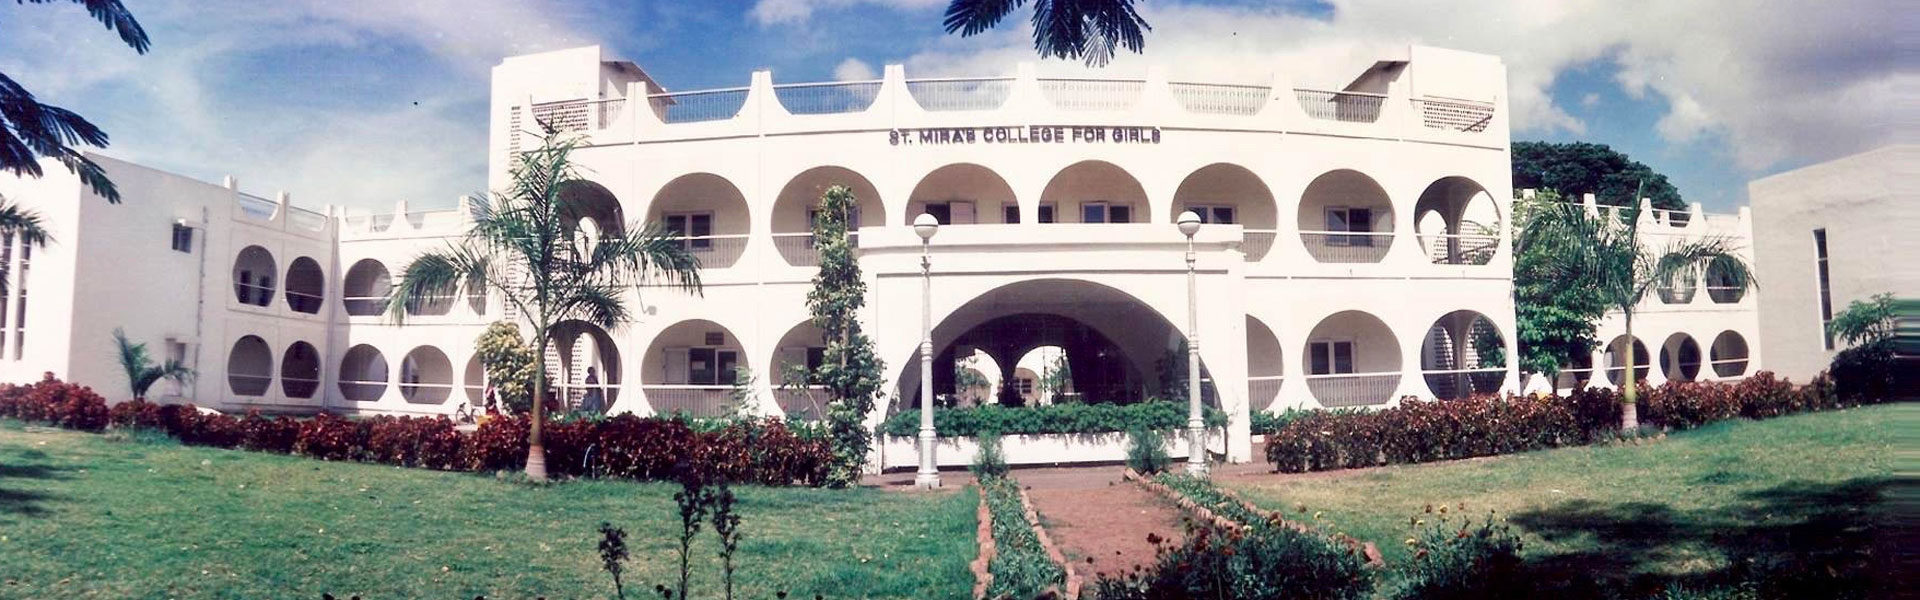 St. Mira’s College for Girls, Pune Image